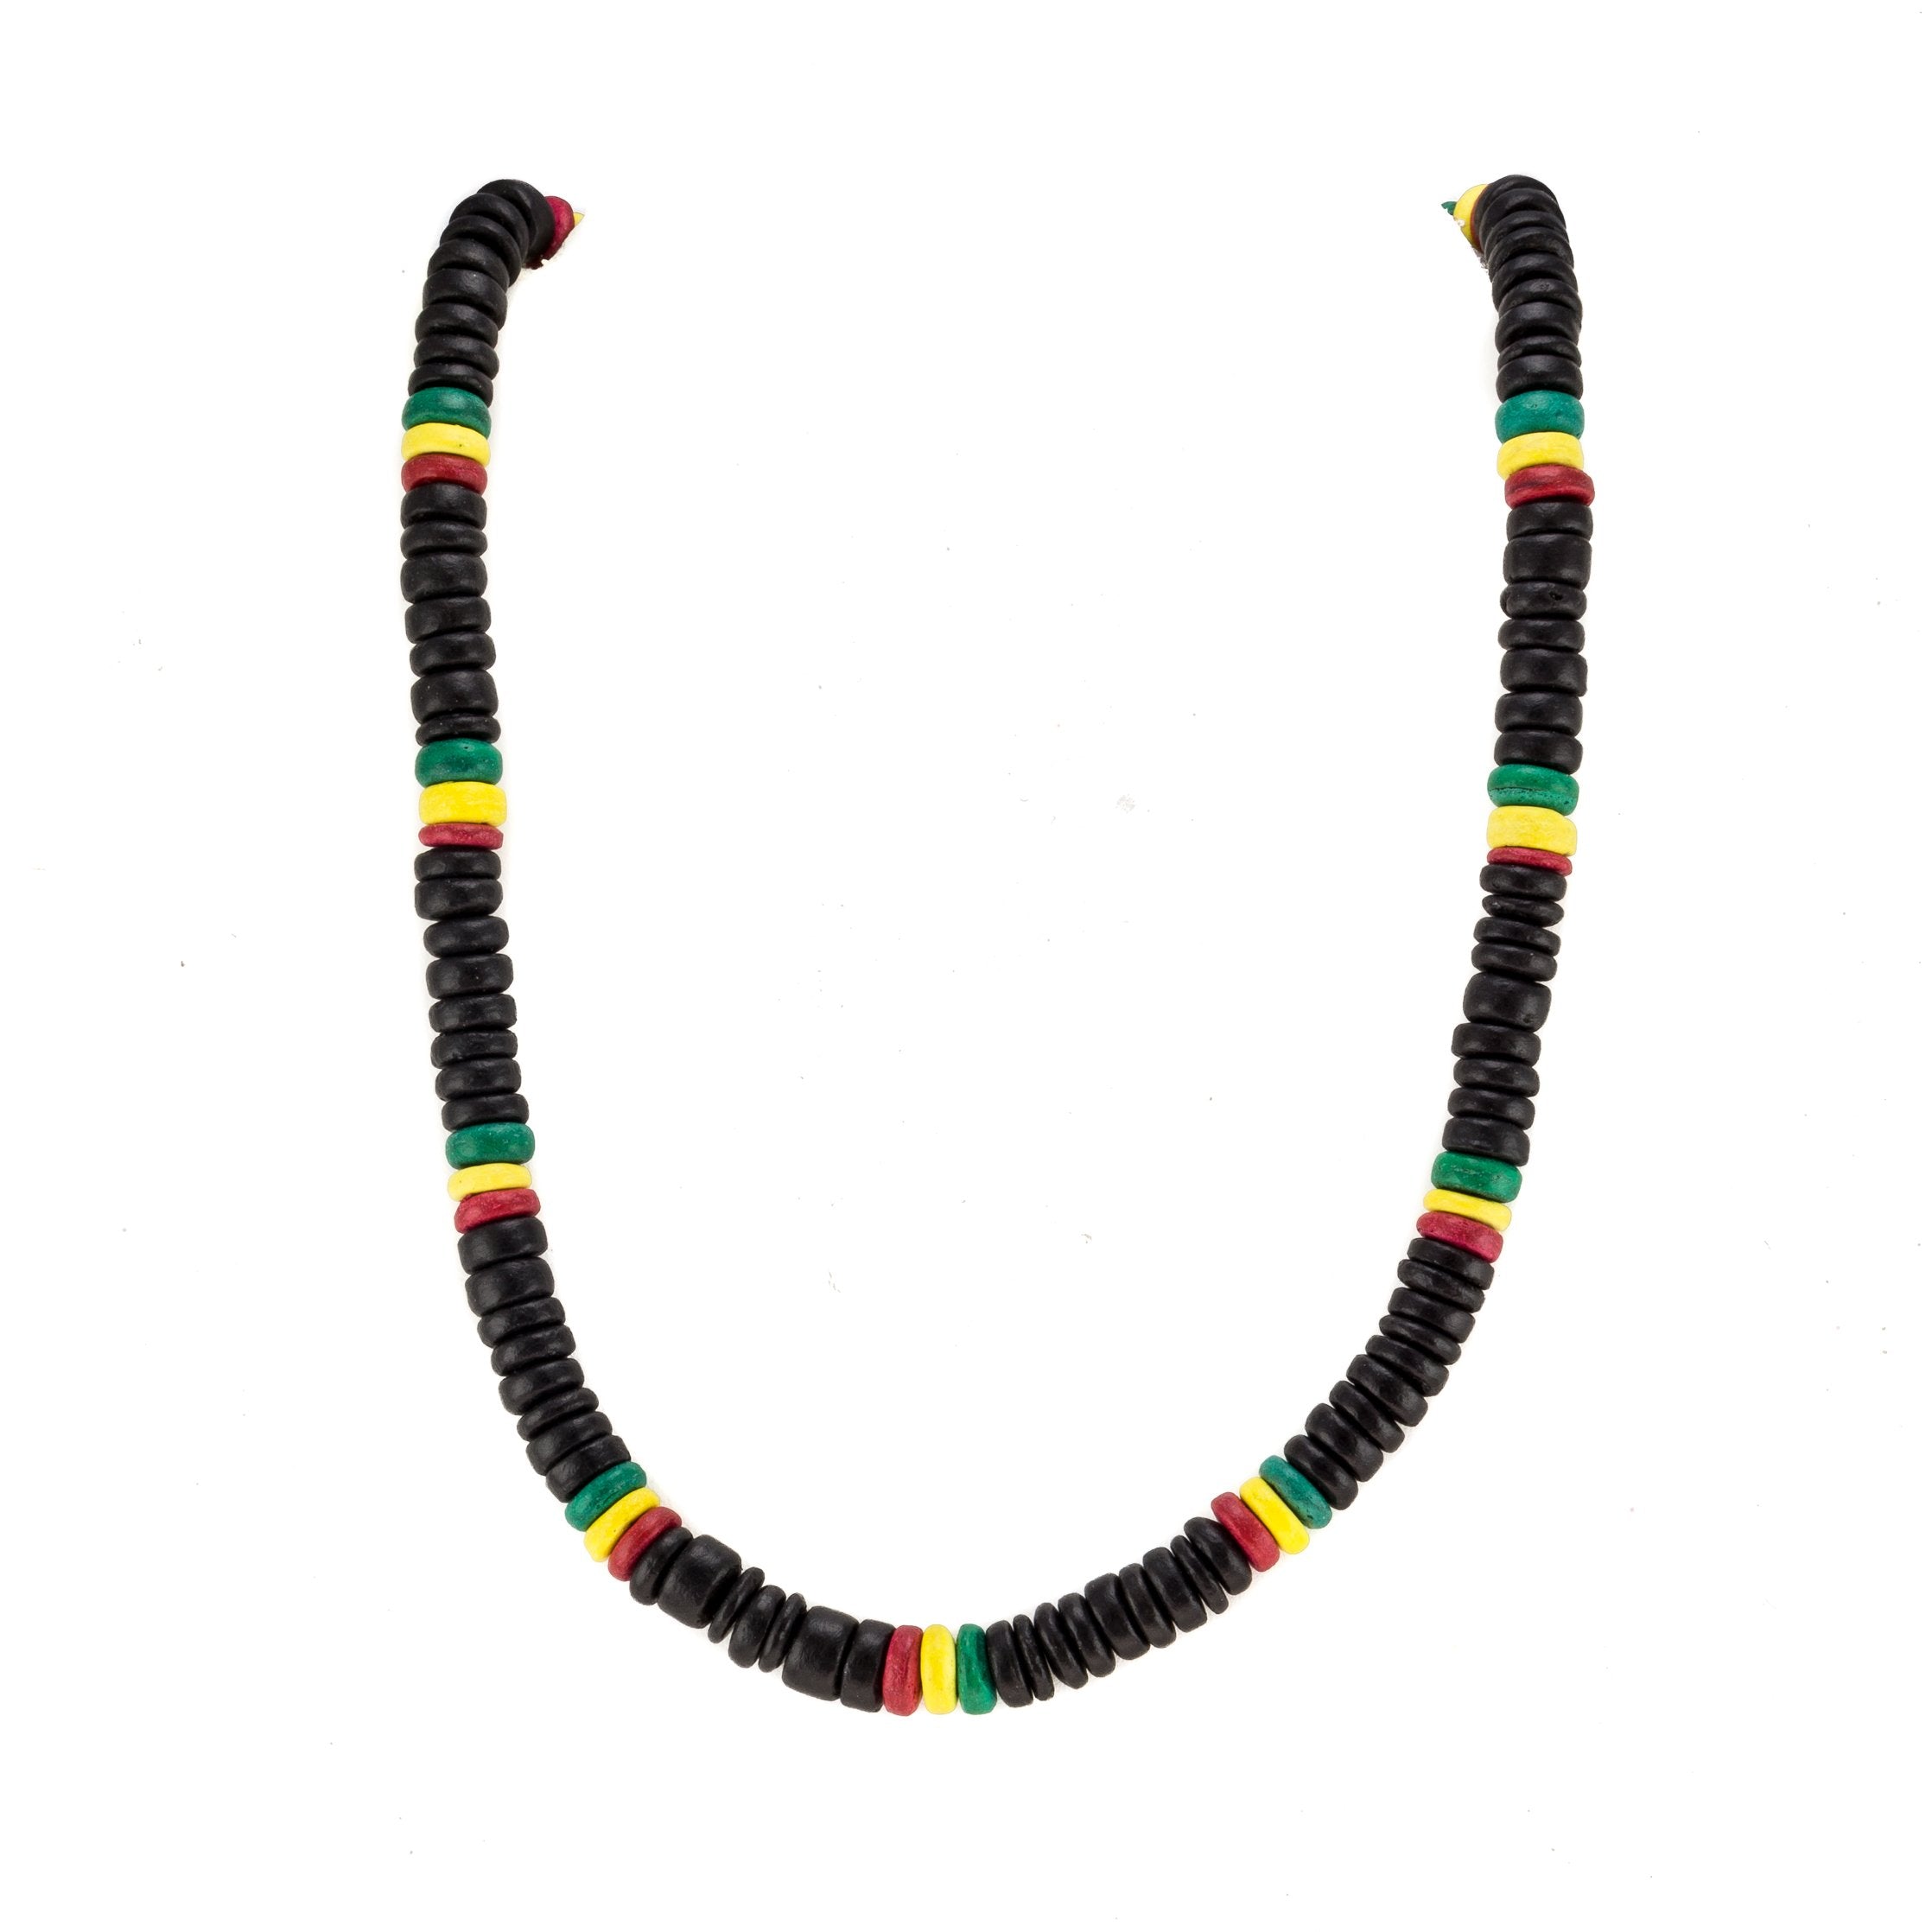 Rasta Coconut Beads Necklace [18 Inches]